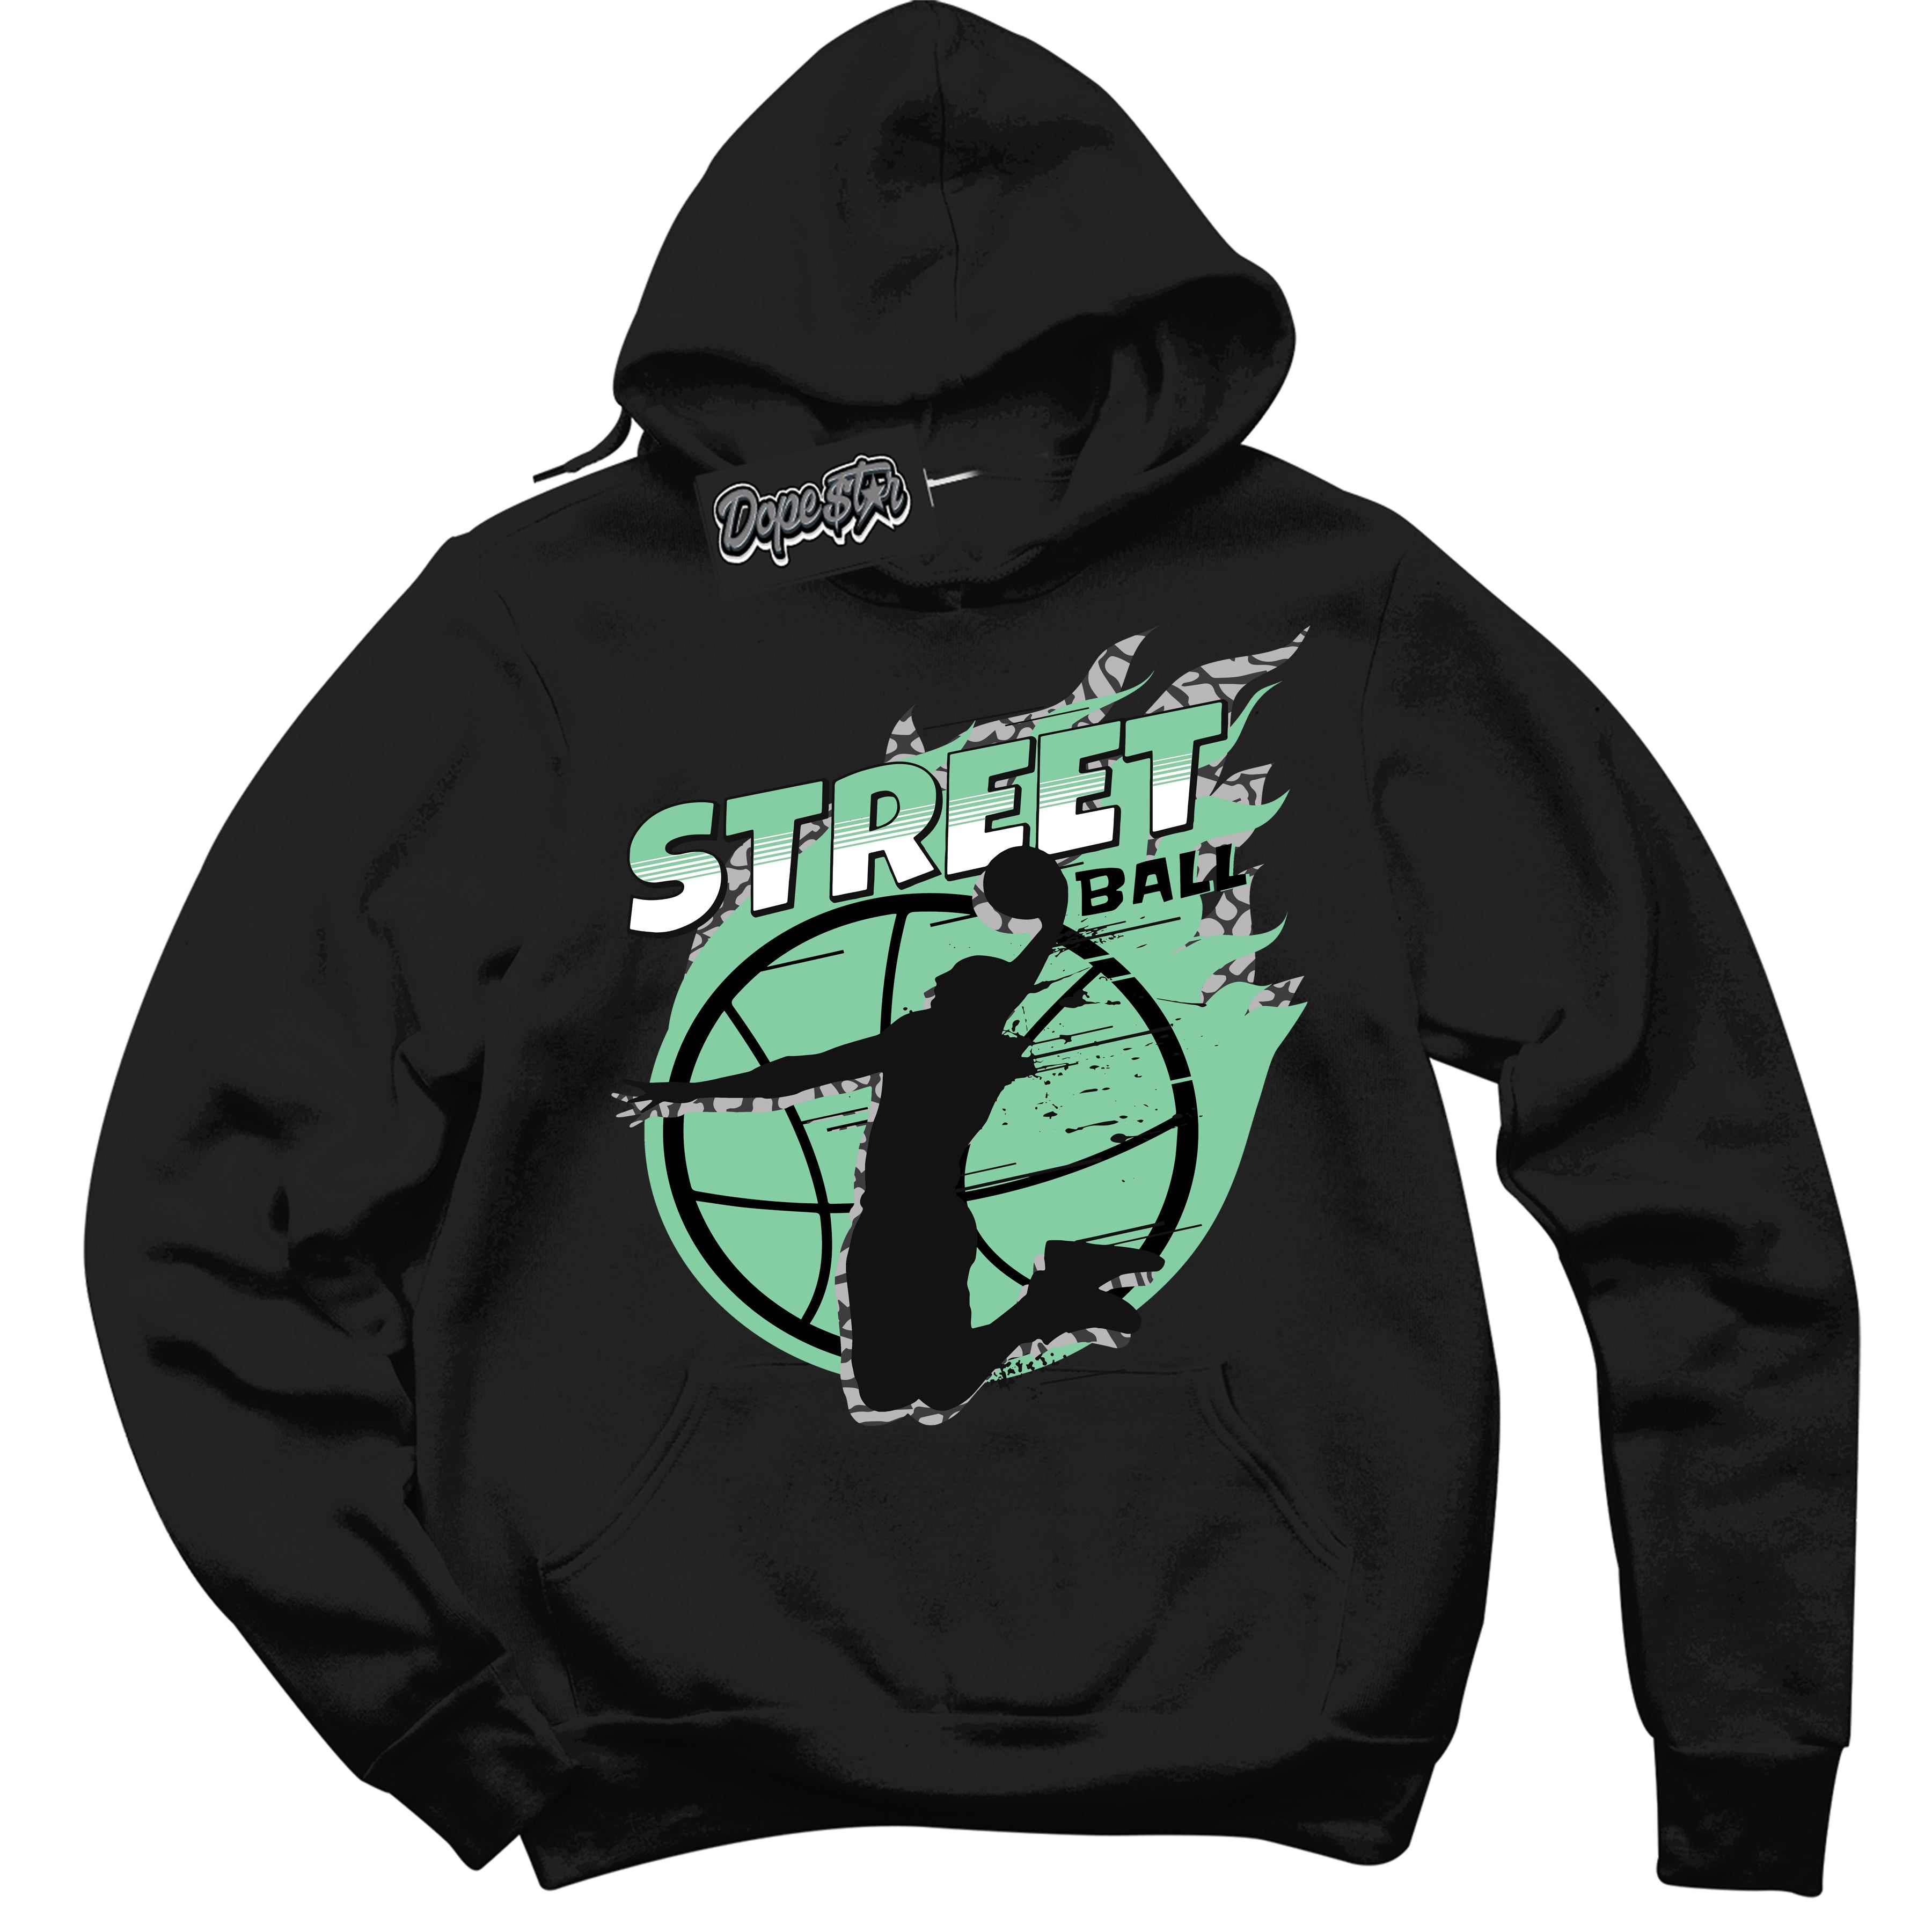 Cool Black Graphic DopeStar Hoodie with “ Street Ball “ print, that perfectly matches Green Glow 3S sneakers